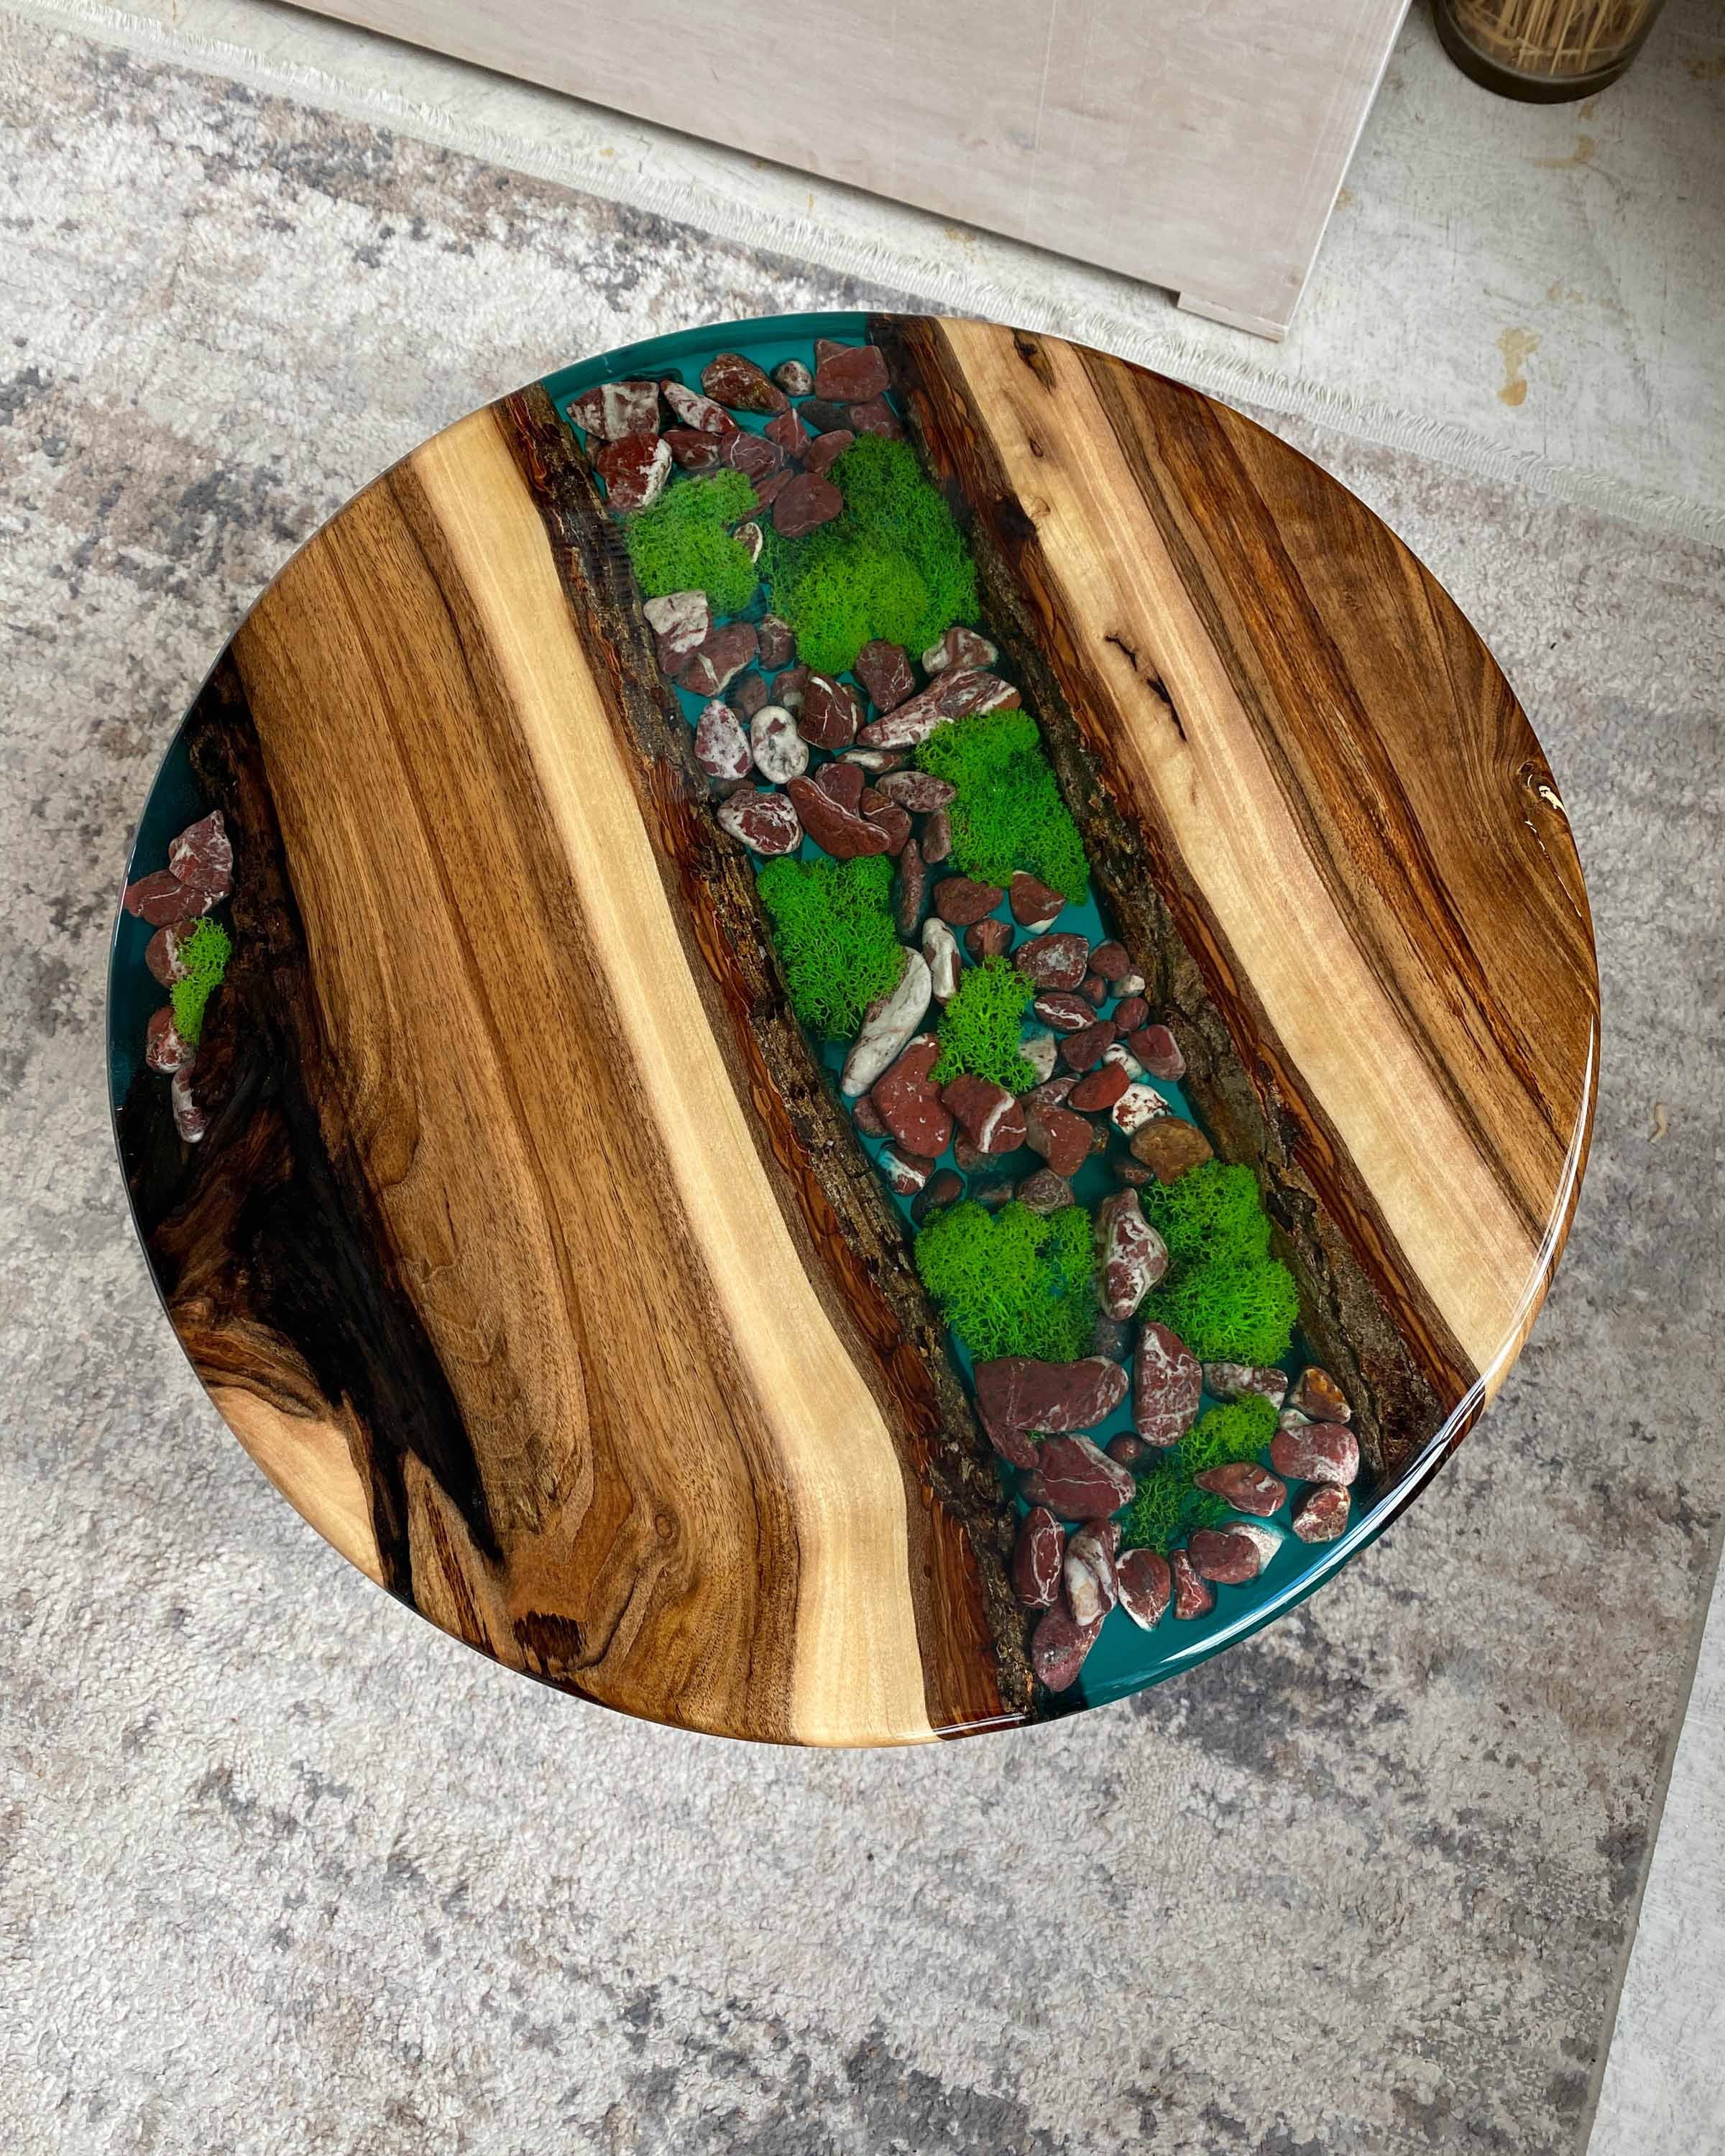 Round Epoxy Table Moss Stones, Table Pebble Decor, Epoxy Resin Wood Table,  Epoxy Coffee Table, ANY SIZE, Fancy Table, Custom Order Table 